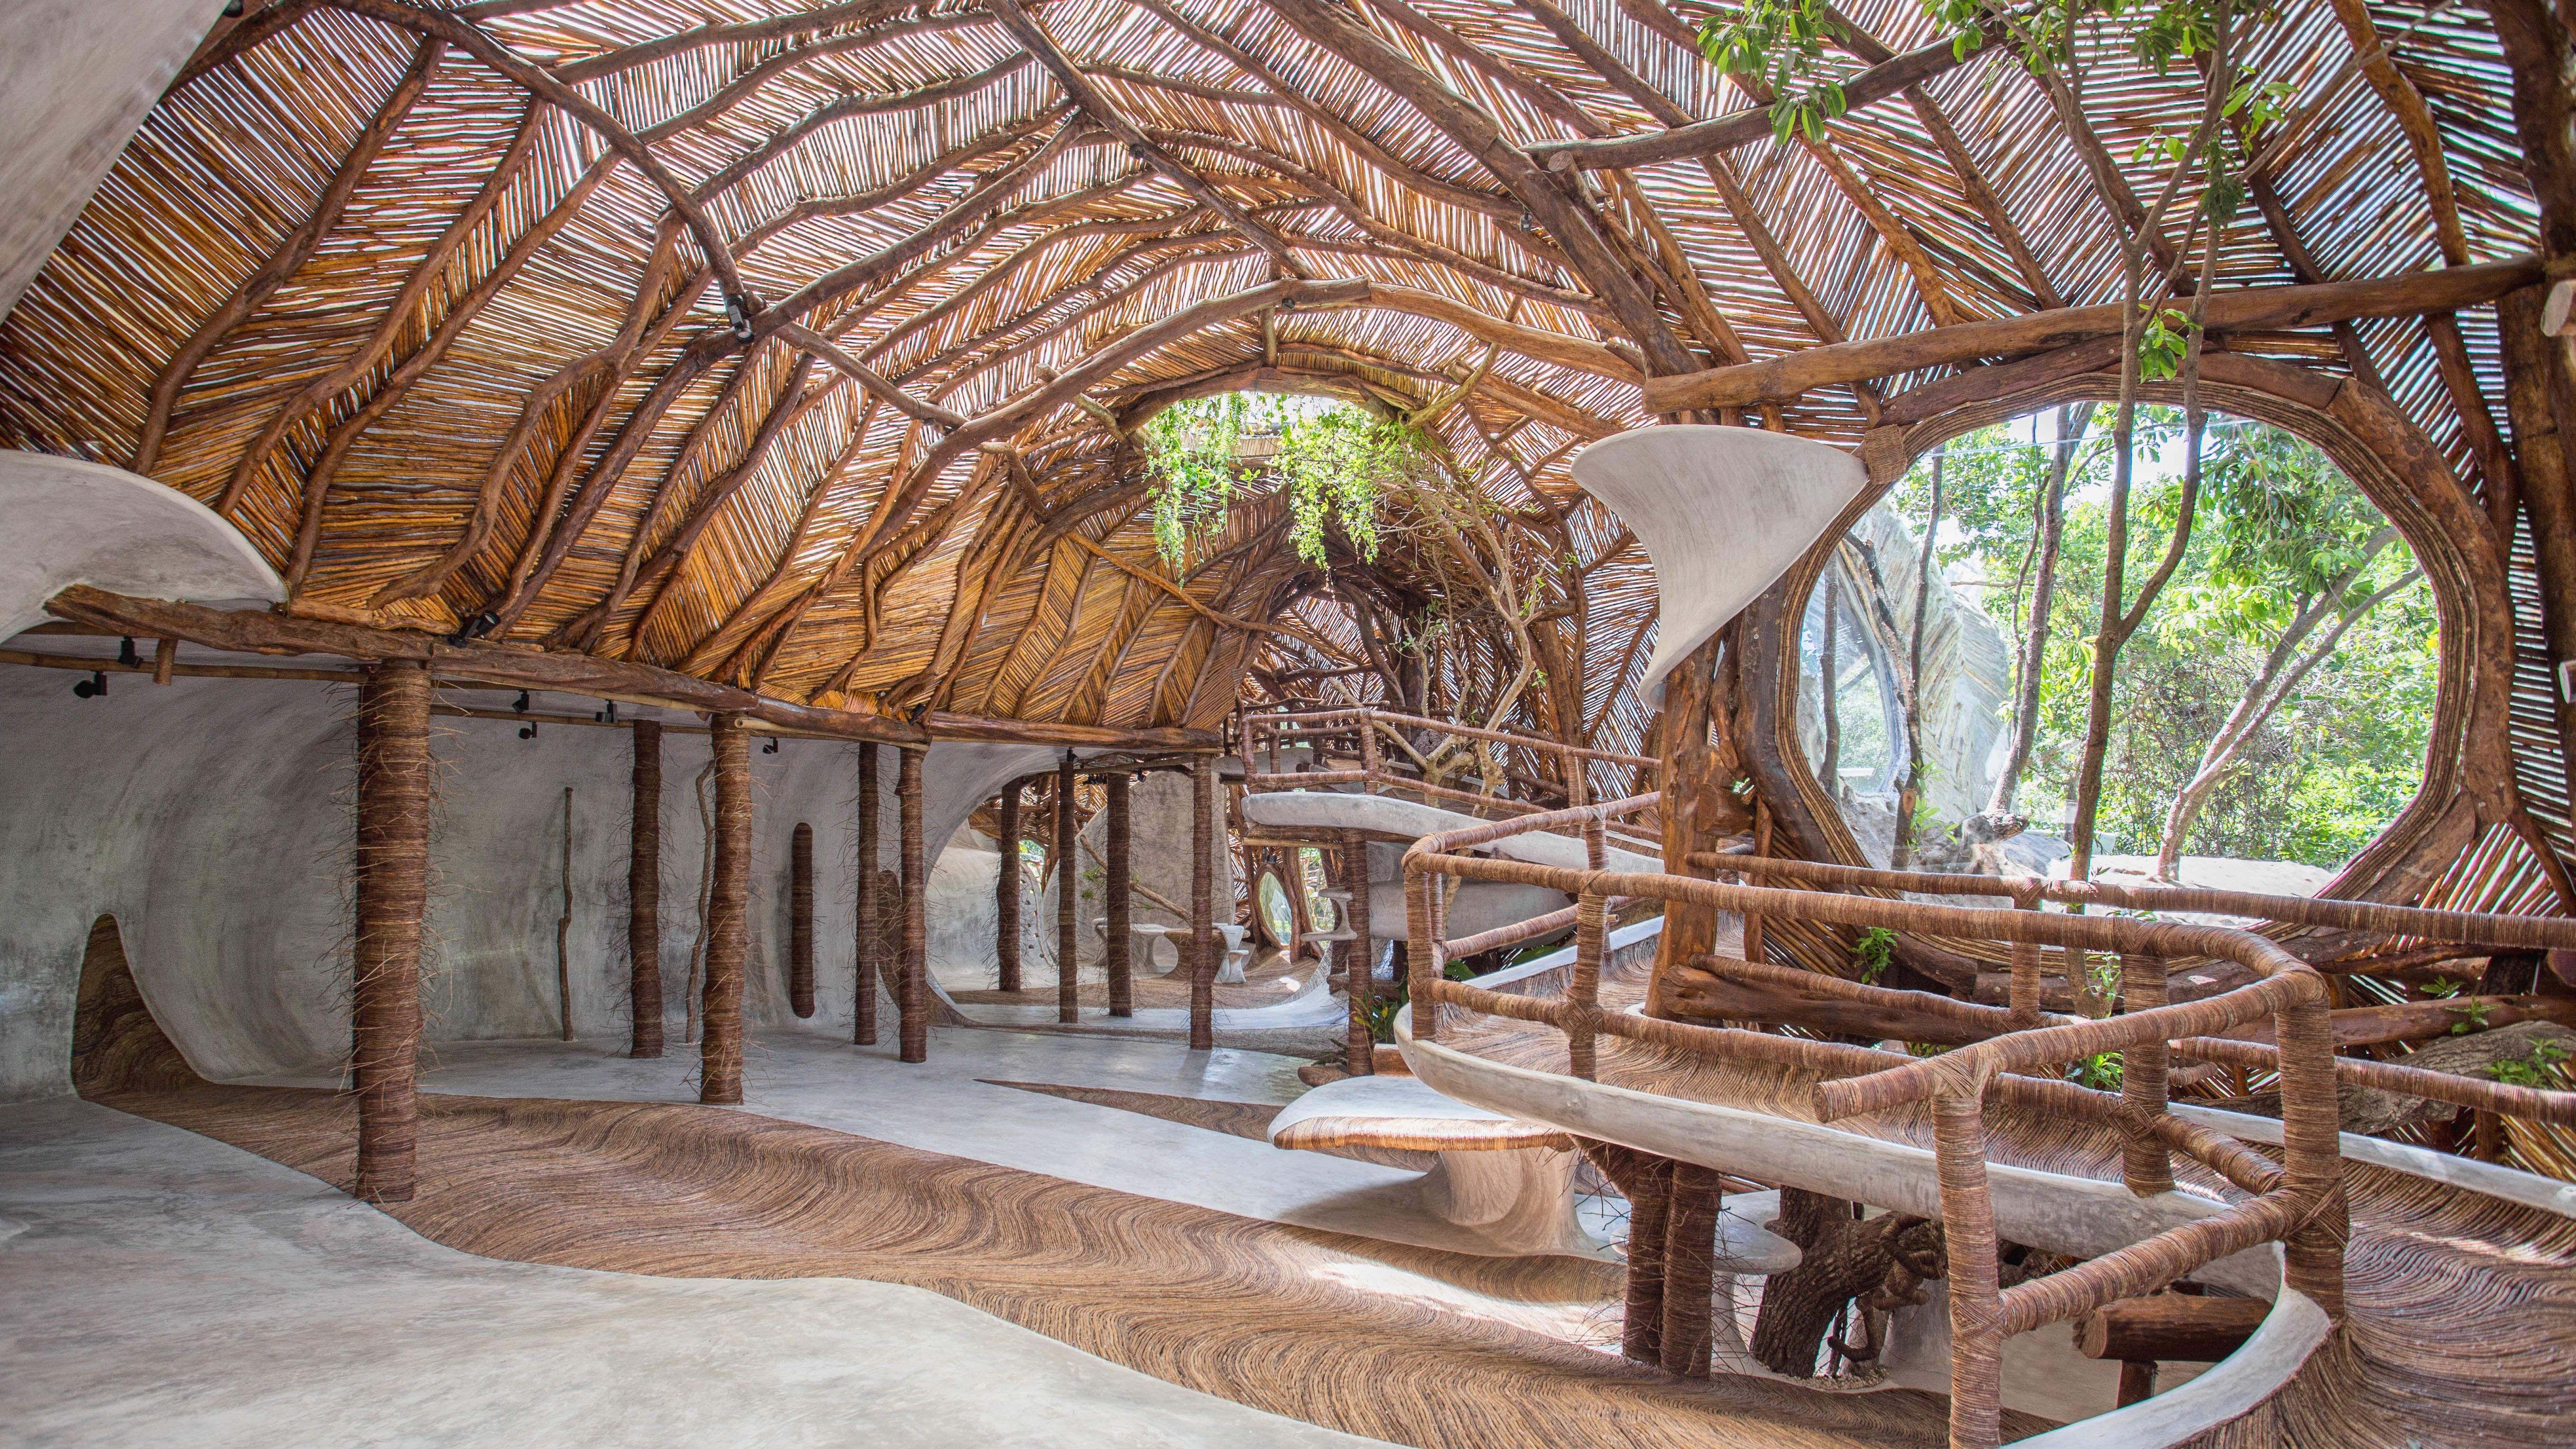 Step Inside This Stunning, Nature-Inspired Art Gallery in Tulum, Mexico